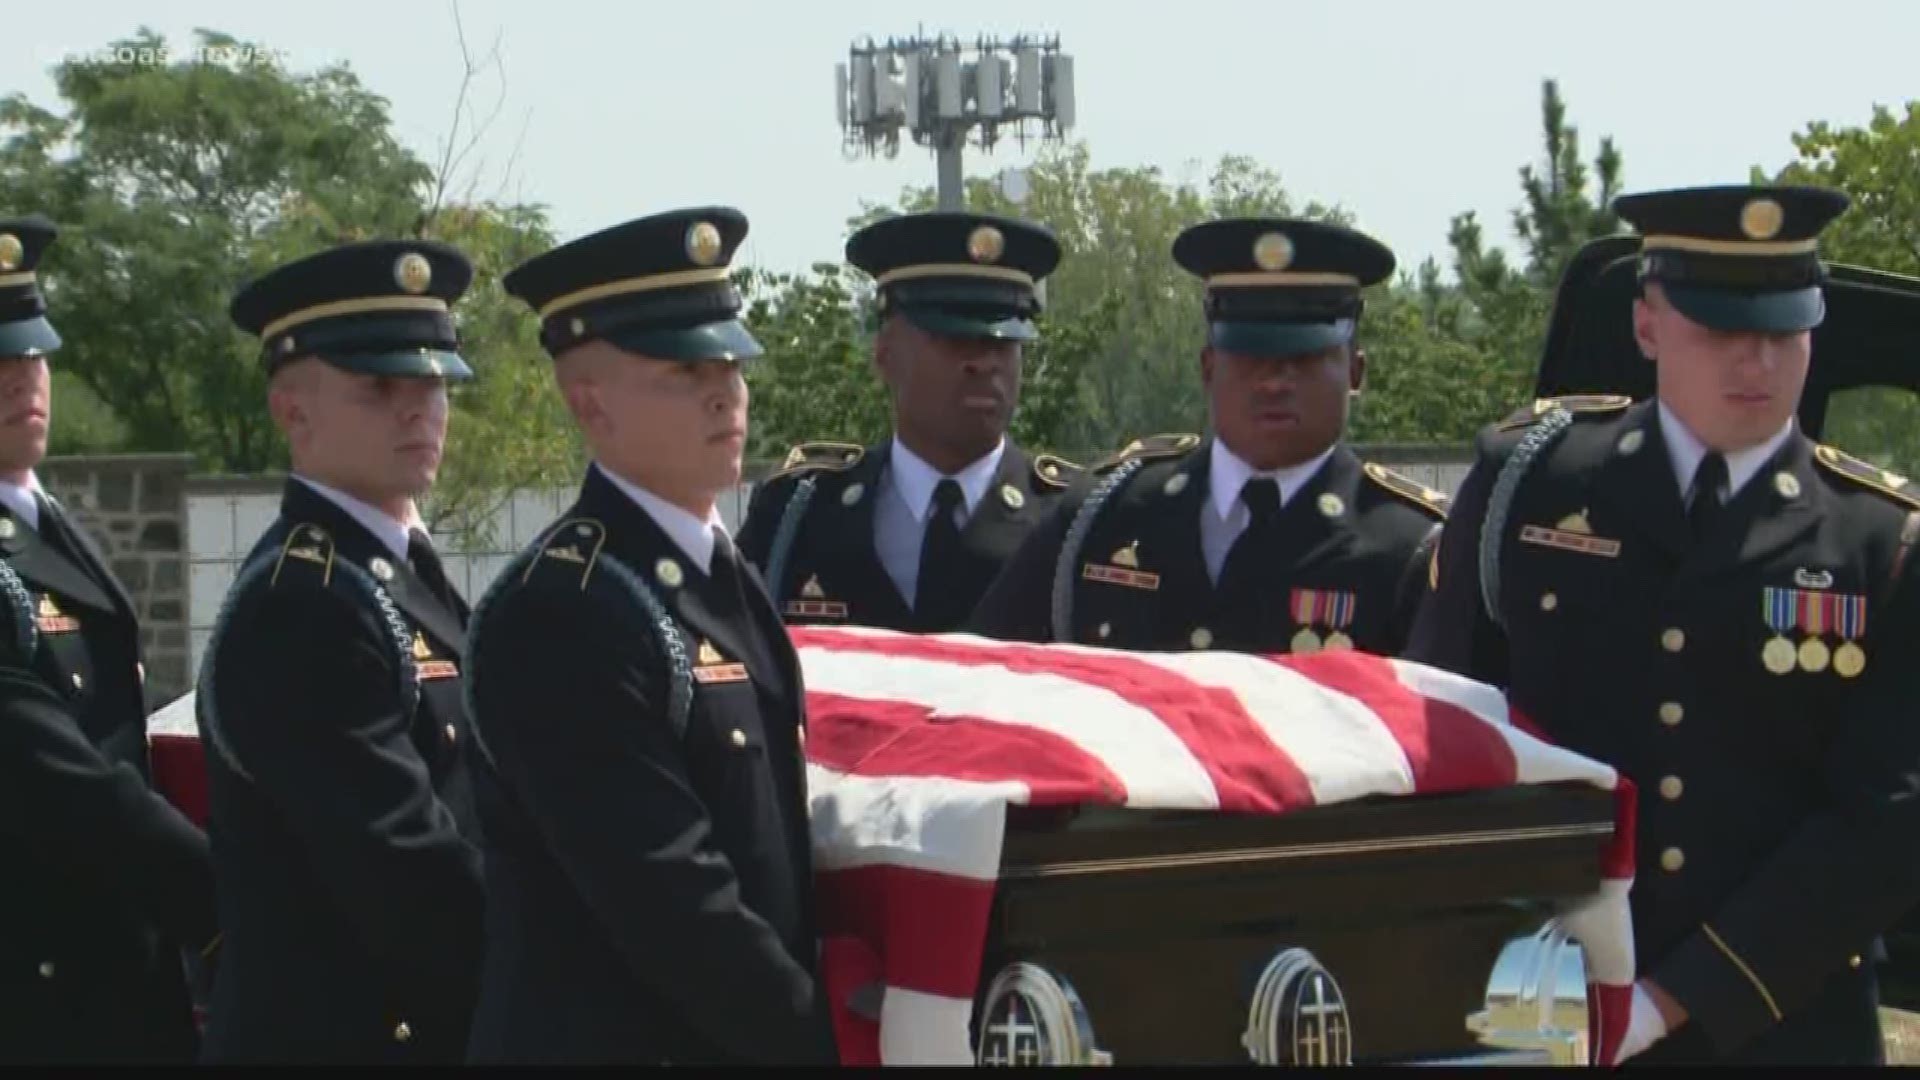 Lamar Williams was just 21-years-old when he was killed in a chaotic battle in Vietnam in 1971. Williams' body was exhumed two weeks ago and this week he was buried at Arlington National Cemetery with full honors.